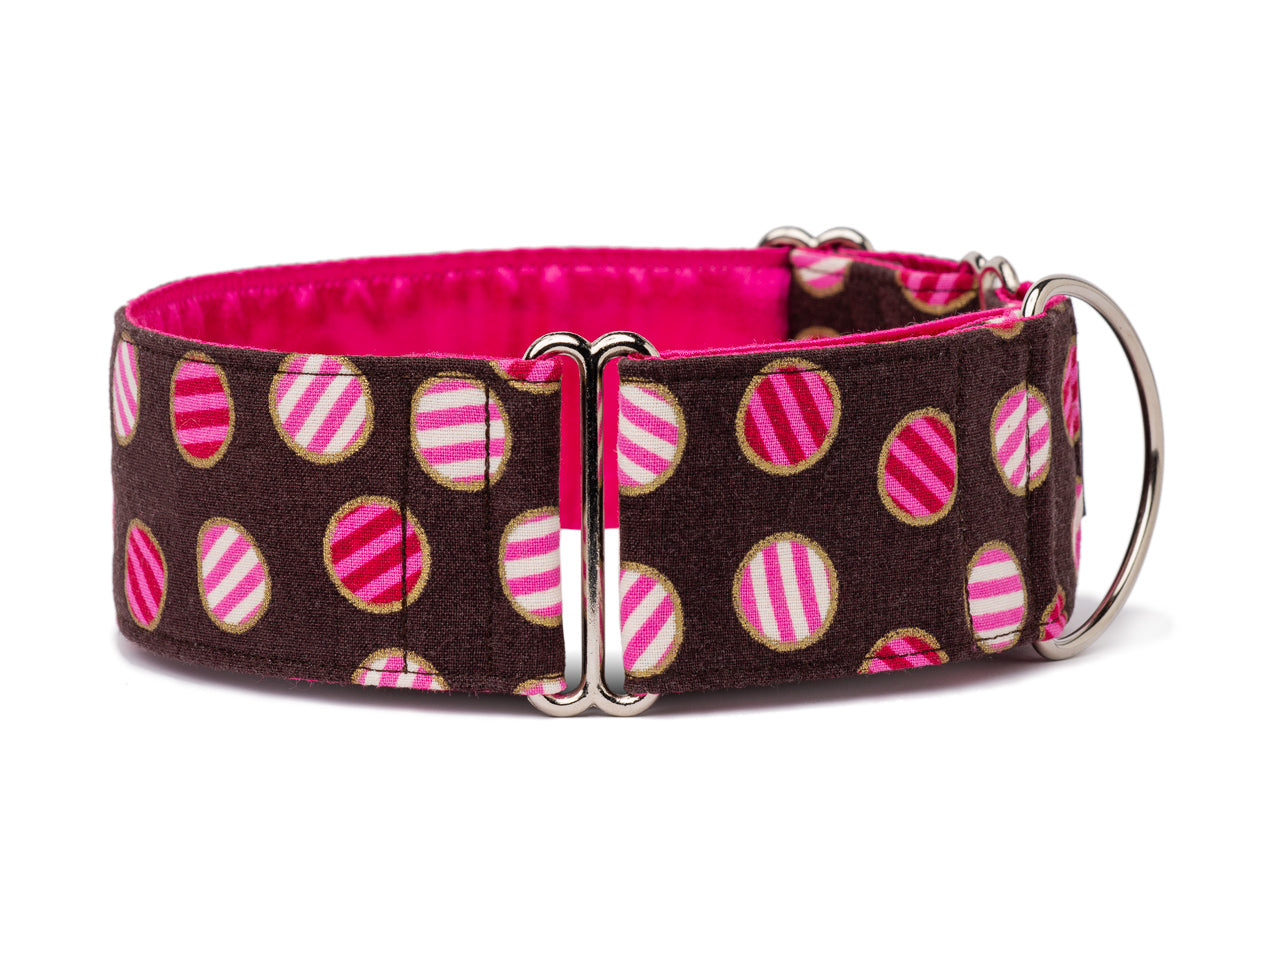 Like a sweet treat your pup can wear, this chocolate-brown collar with pretty pink dots is sure to please even the most discerning pooch!